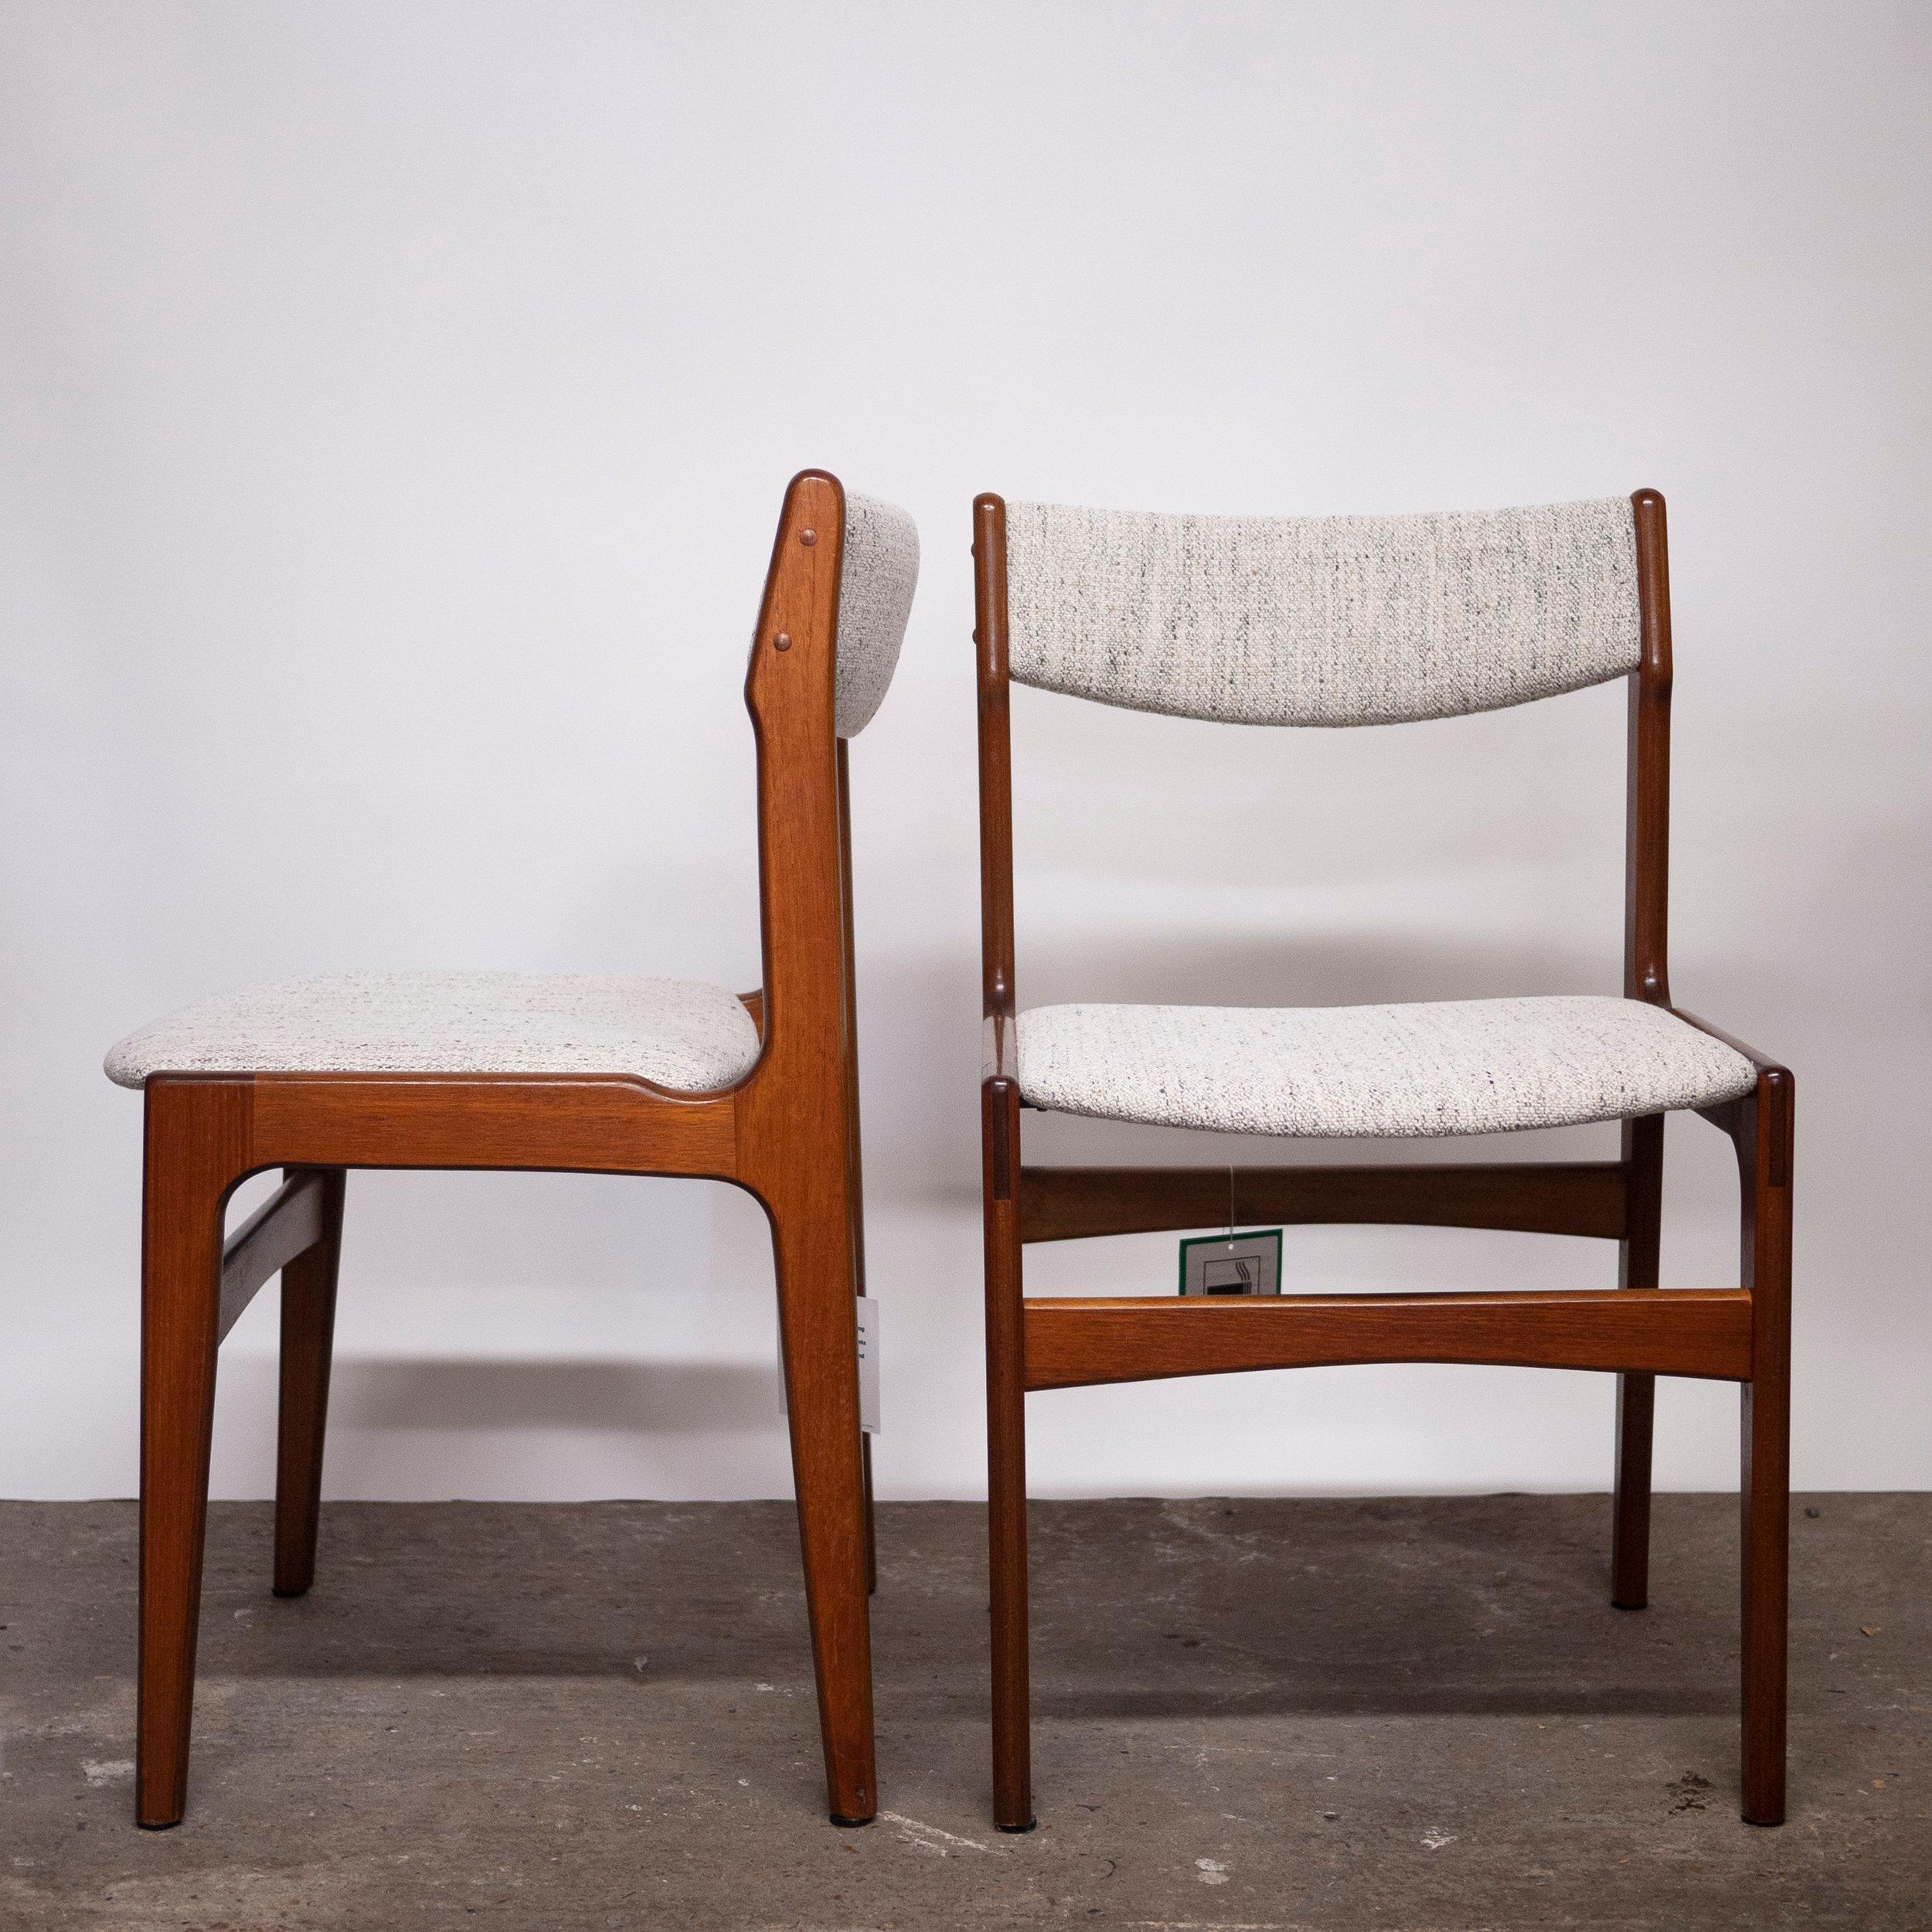 Fabric Vintage Danish Upholstered Teak Chairs by Anderstrup Stolefabrik, Set of 6 For Sale